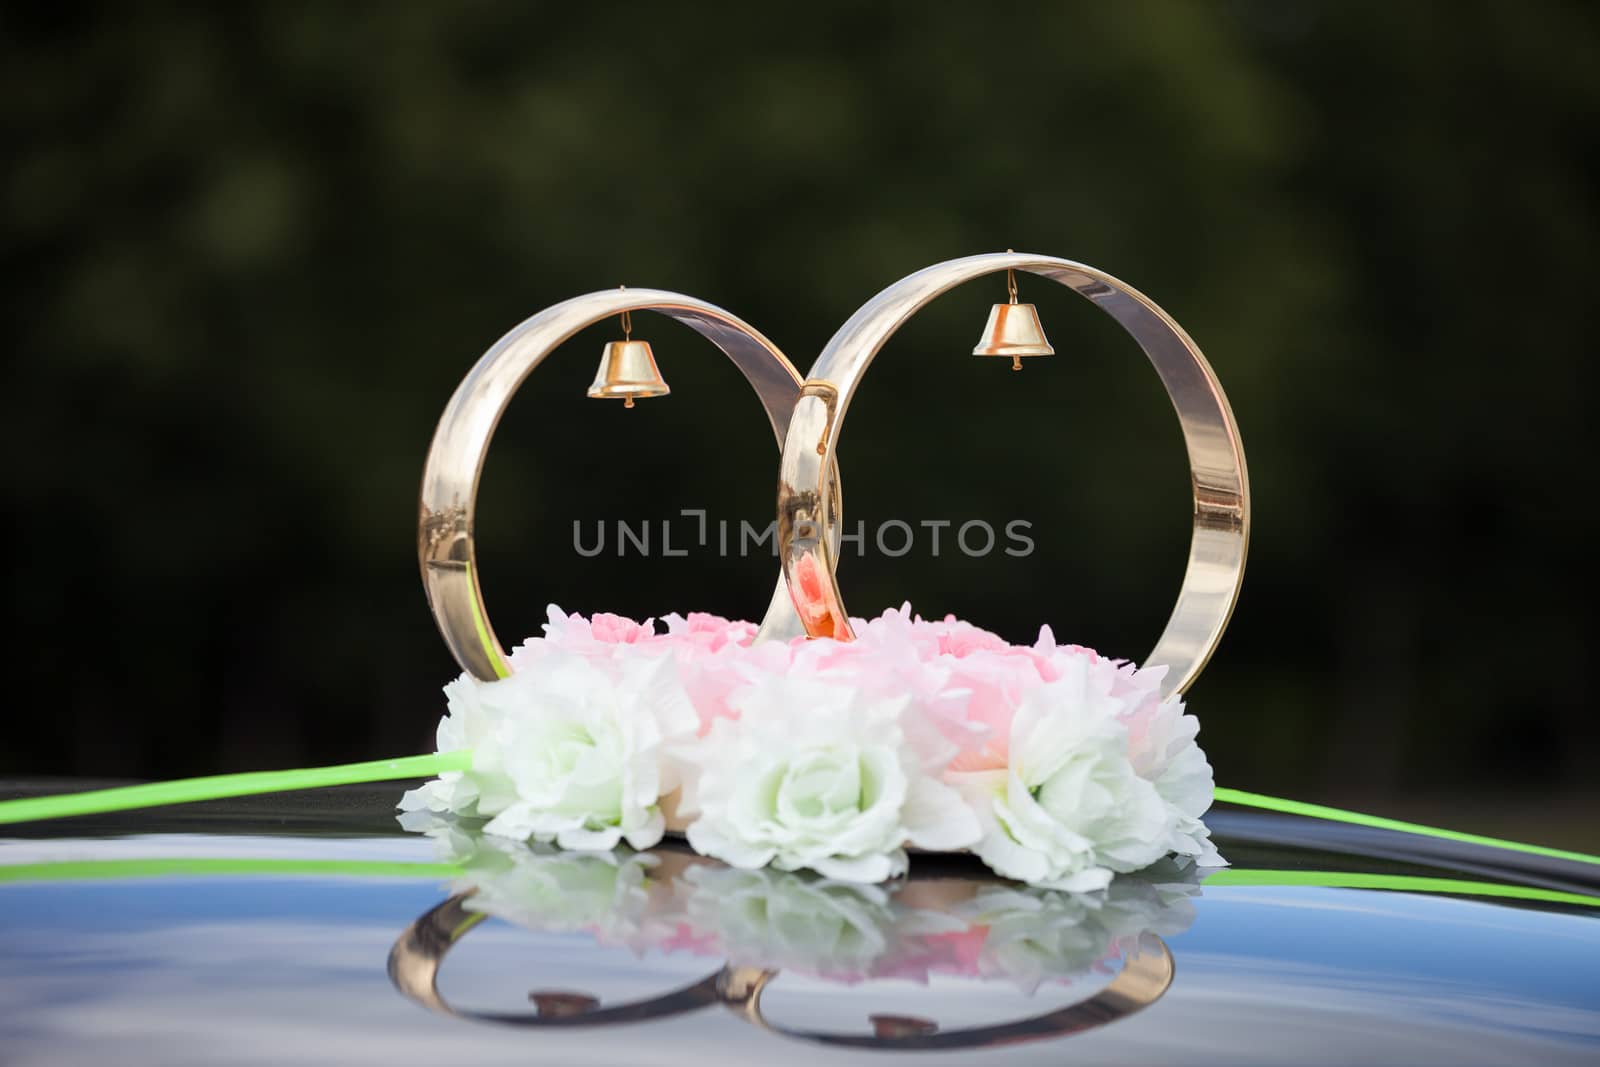 Just married gold rings and rose flowers decoration on wedding limousine car